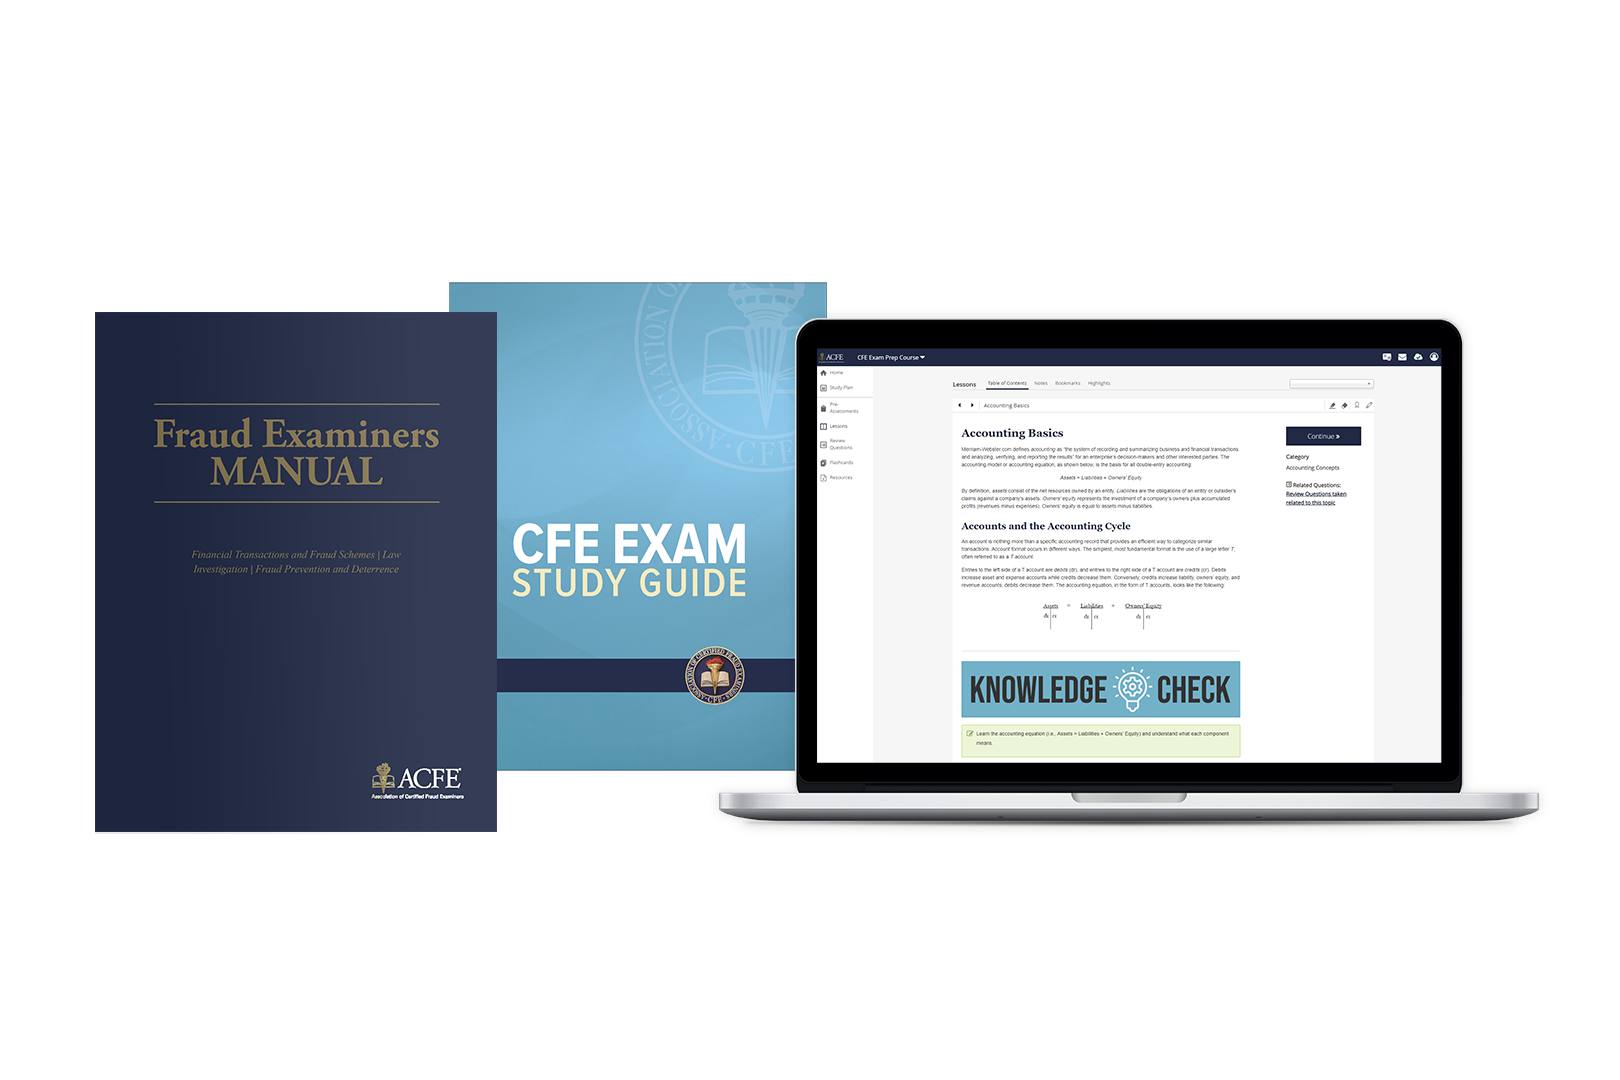 Image of laptop computer with Prep Course software on screen and a digital representations of the fraud examiners manual and cfe exam study guide